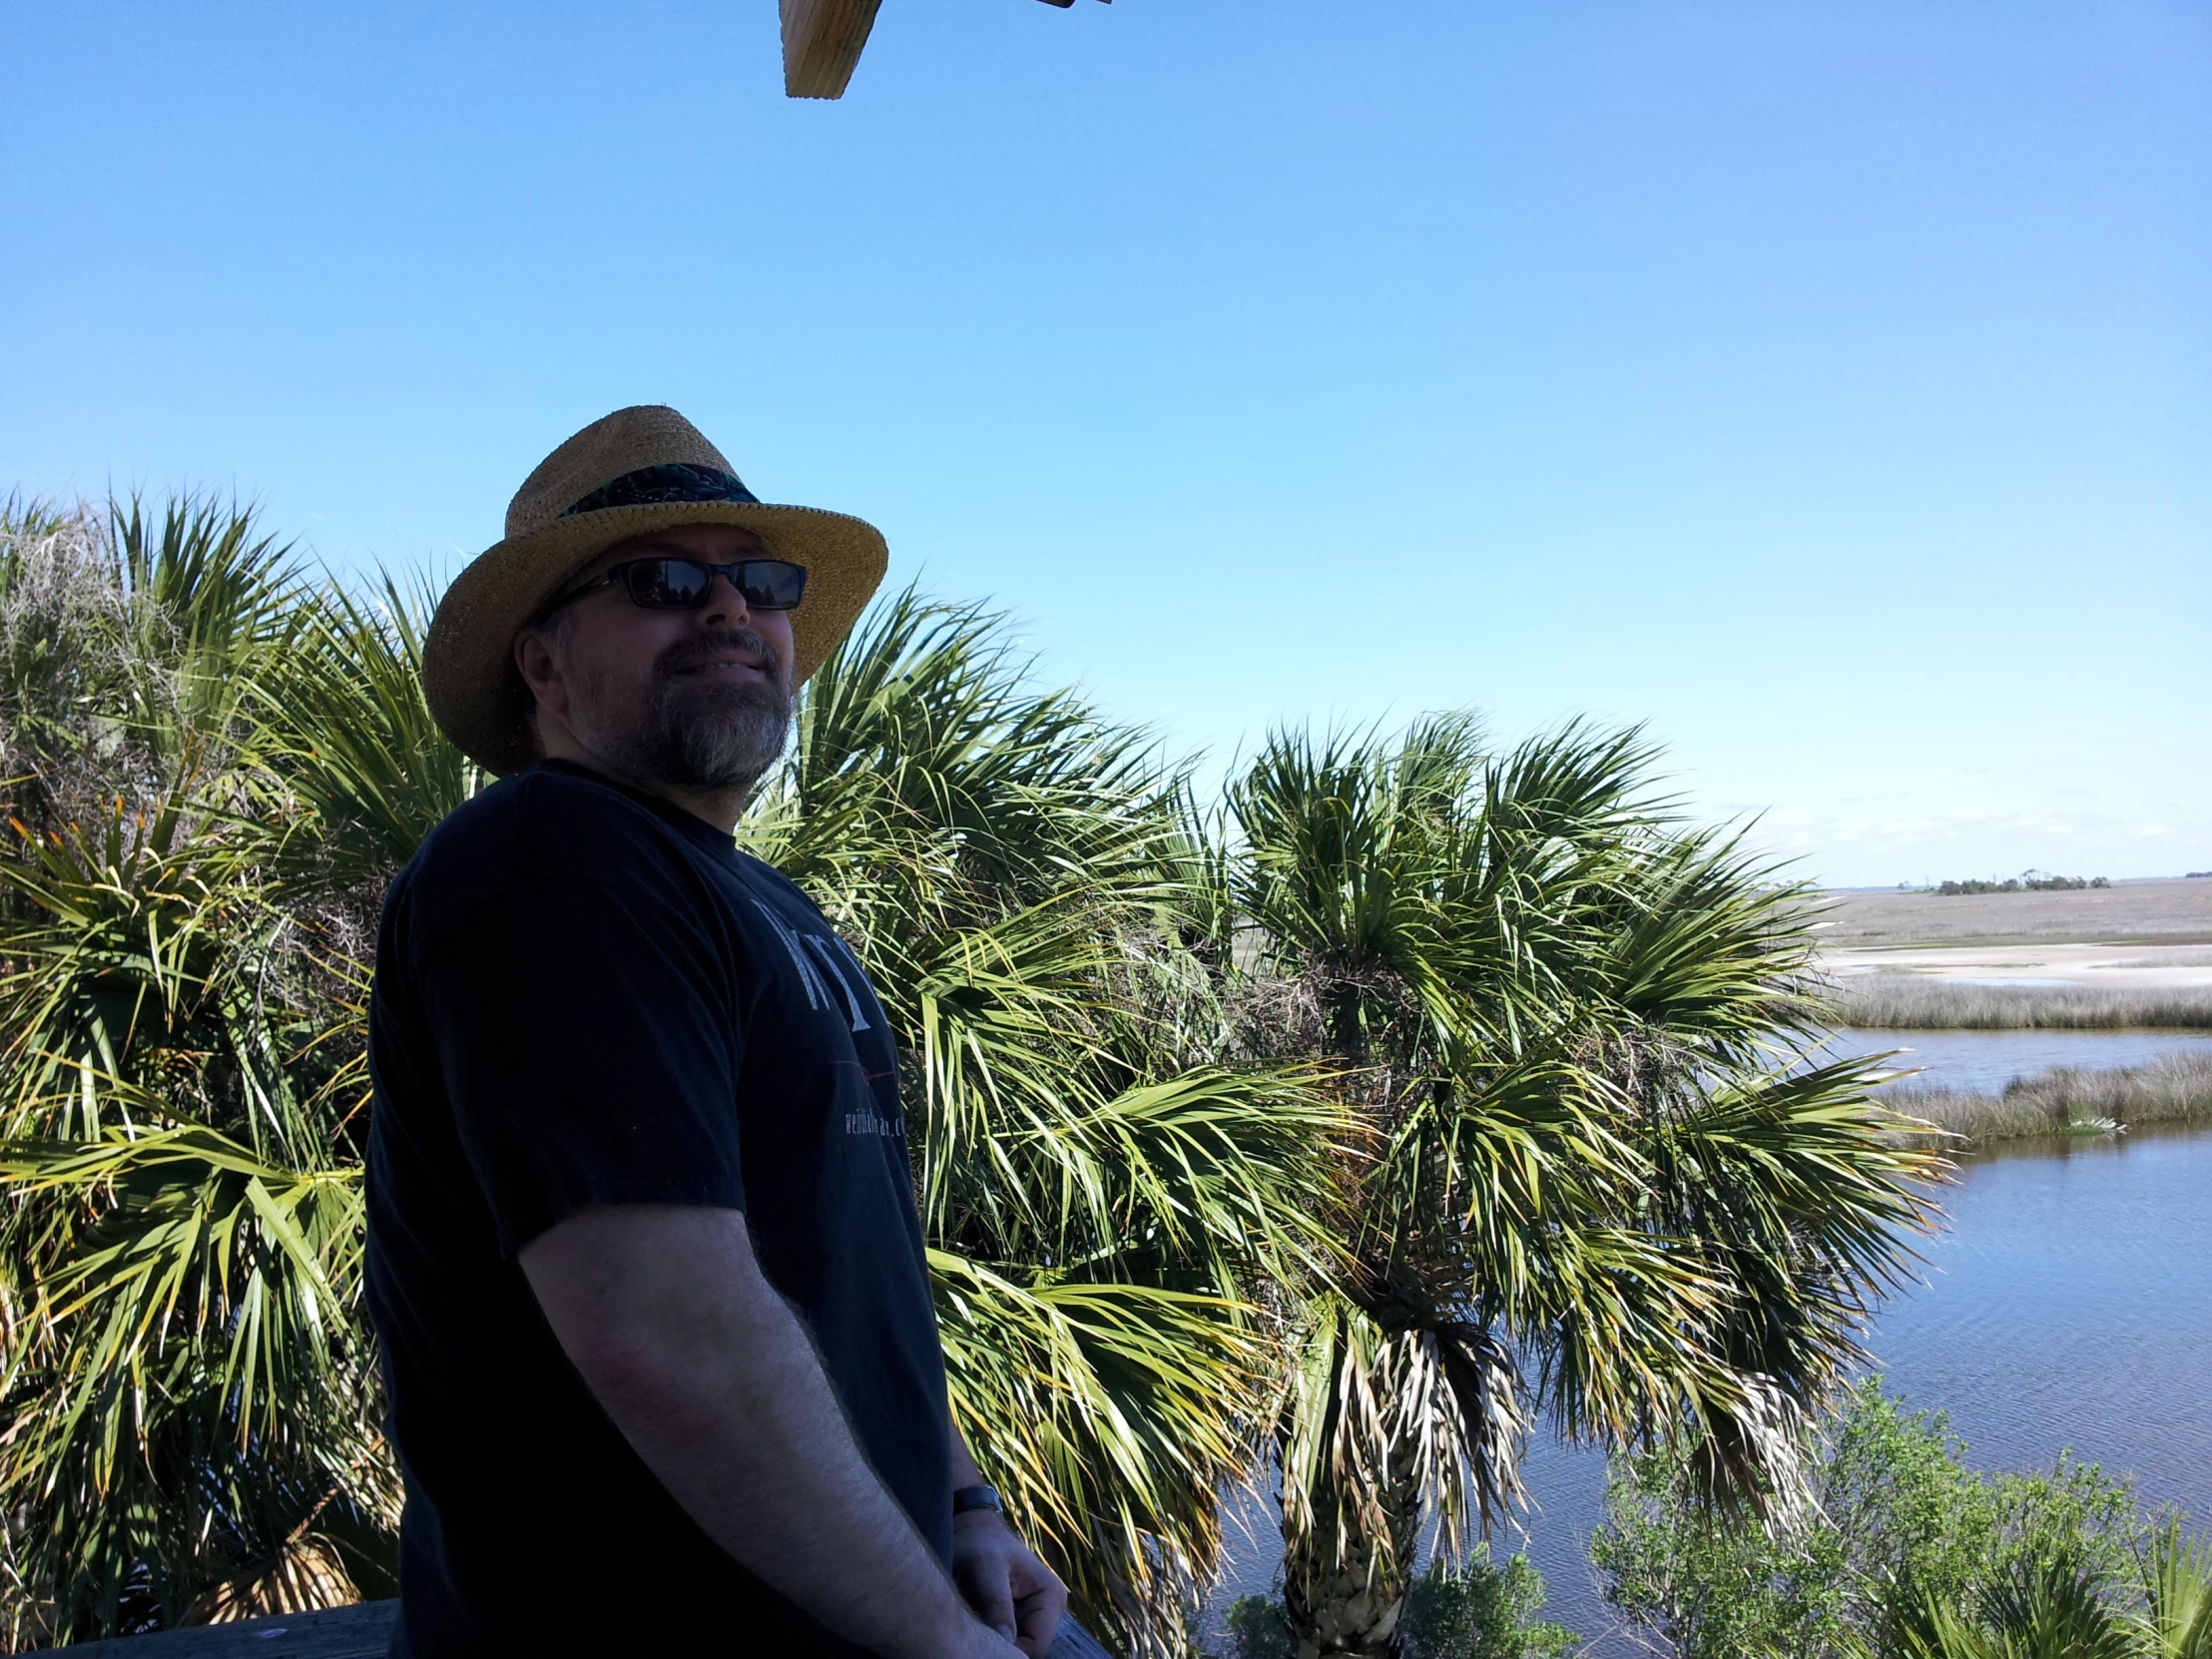 a man wearing a hat stands on the balcony in front of a lake and palm trees